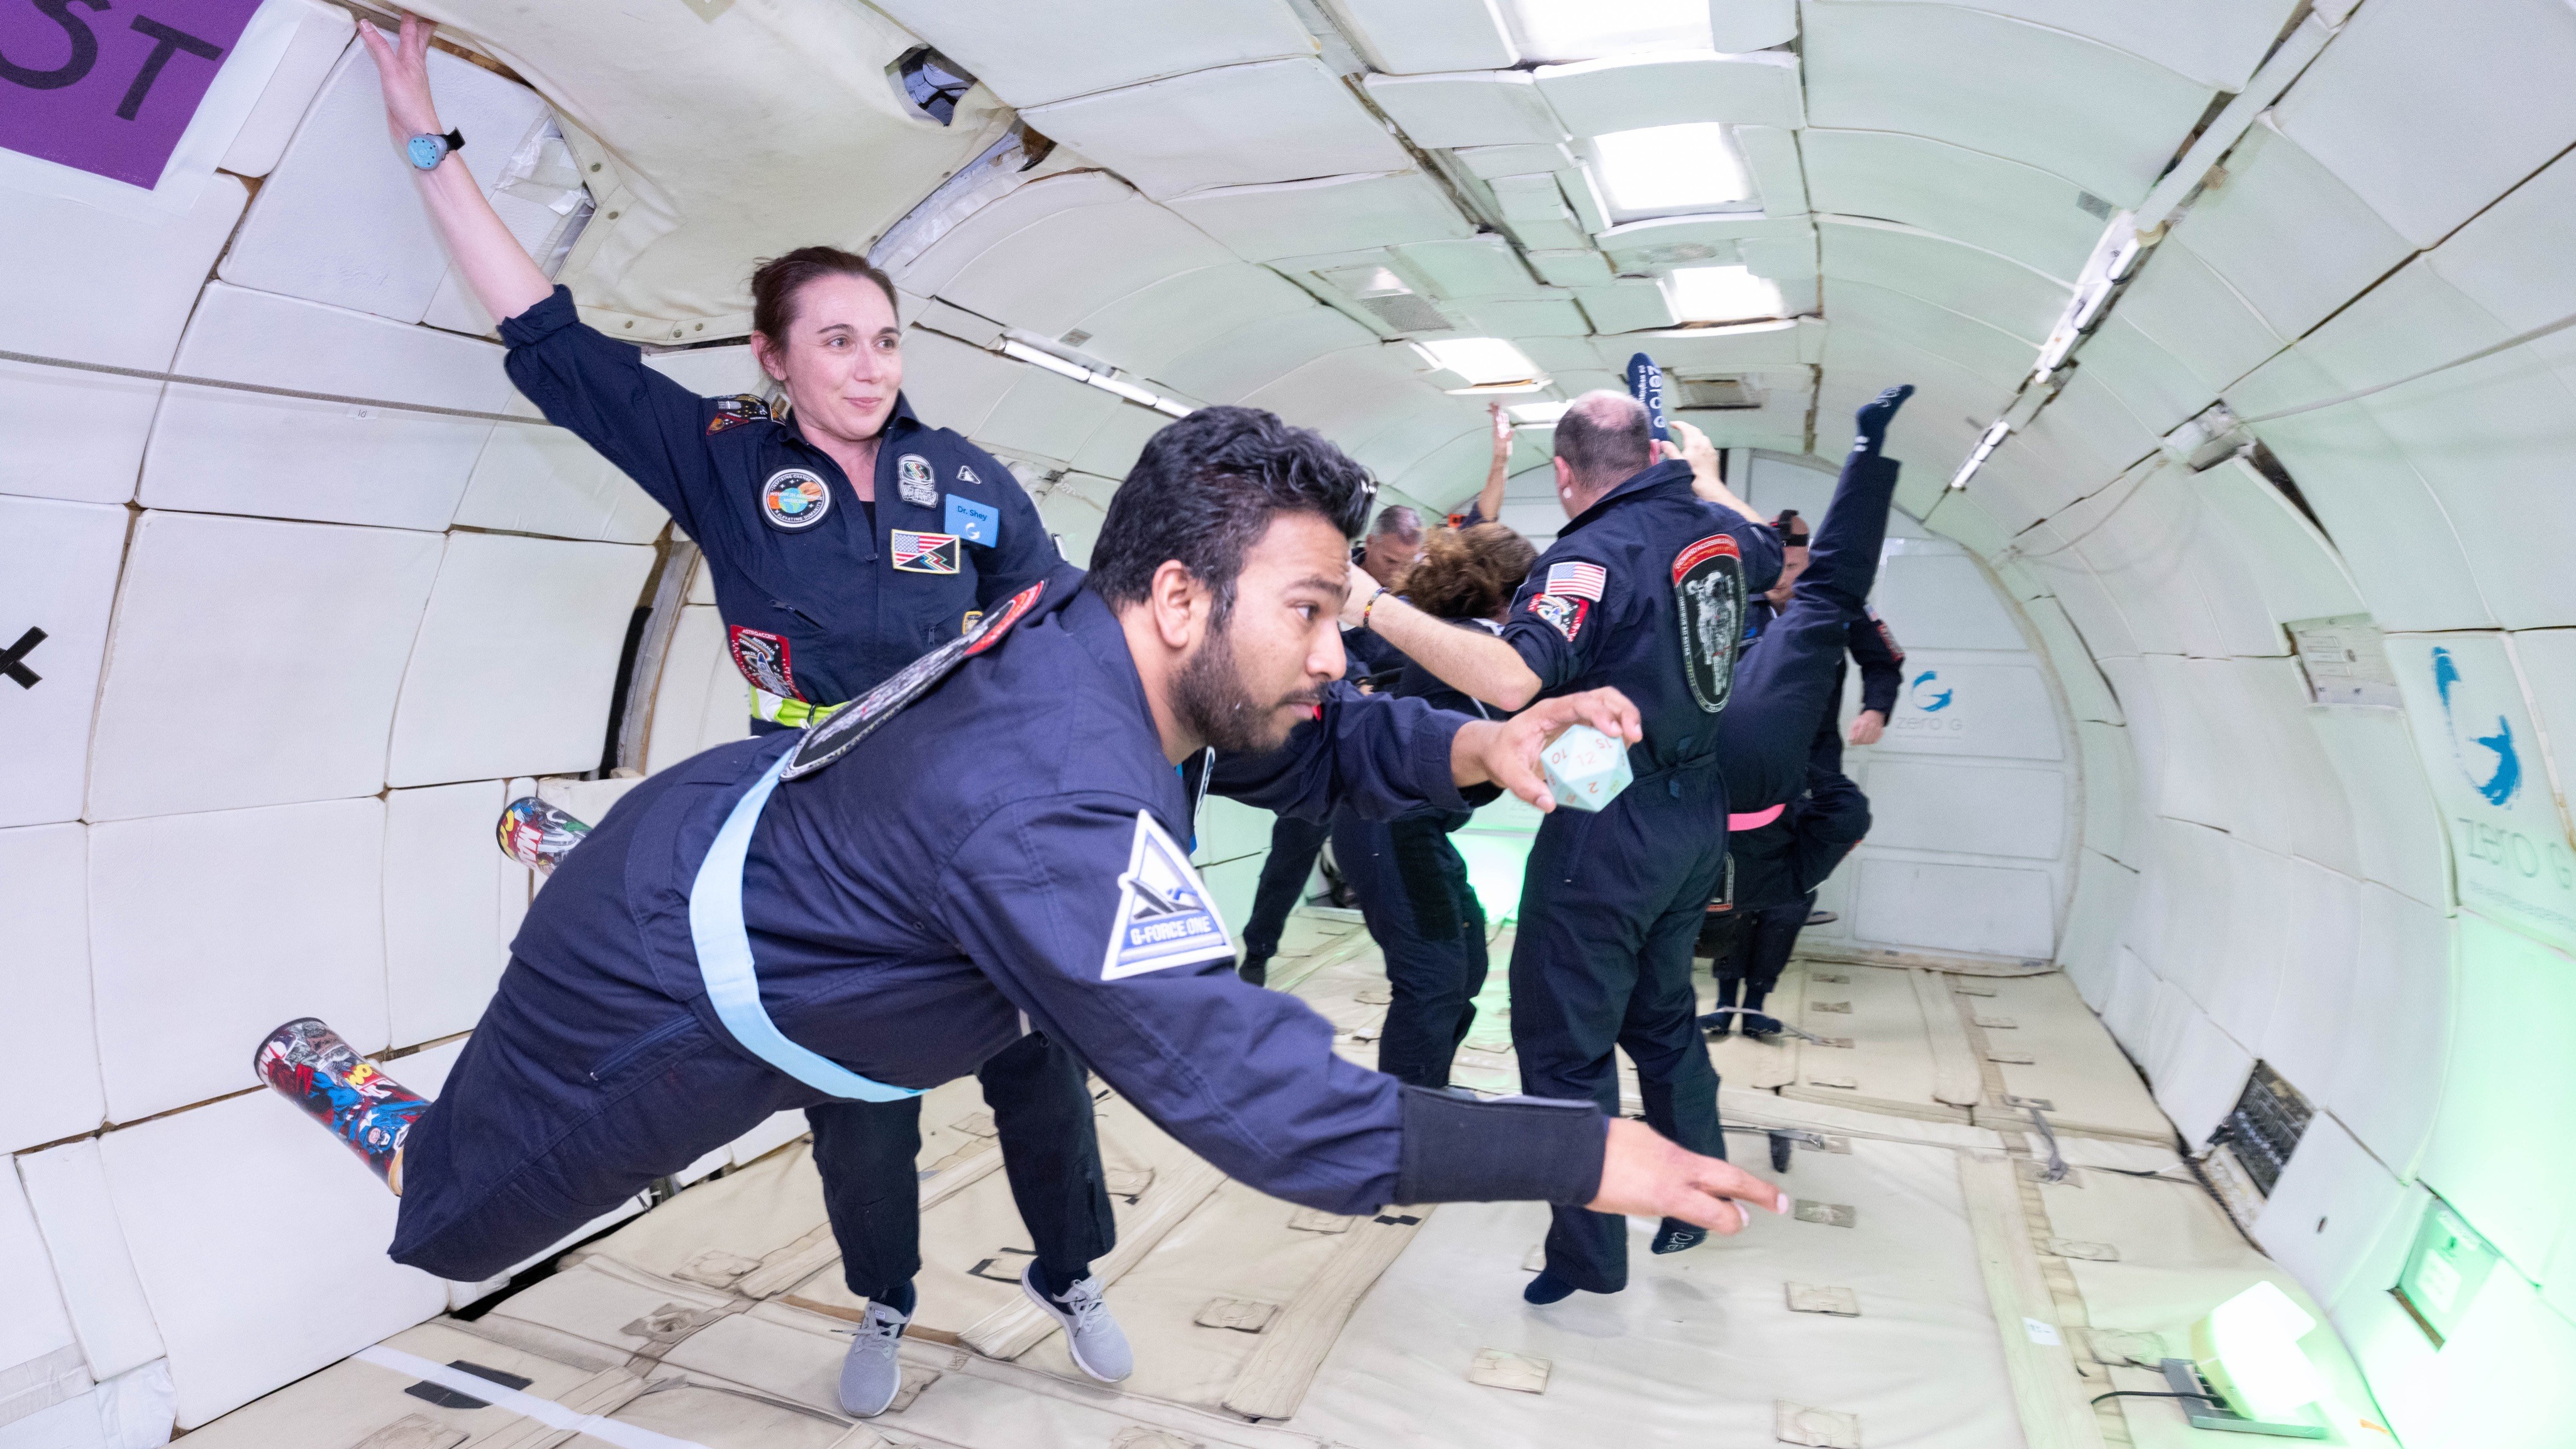 Zero-G flight for disability ambassadors shows space is accessible for all